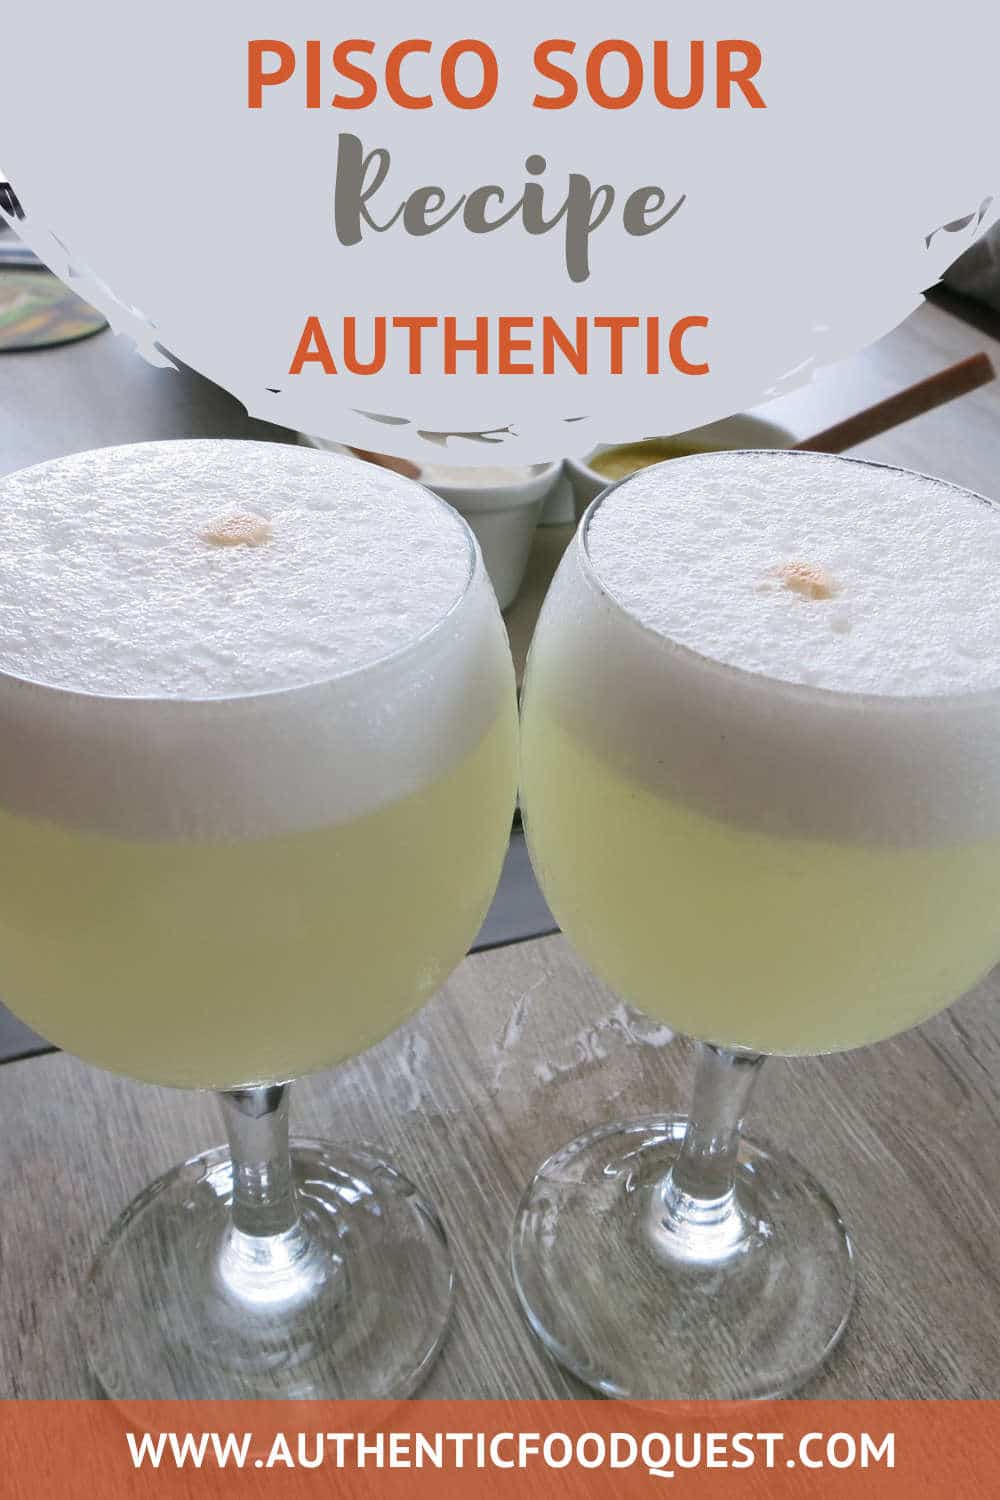 How To Make An Authentic Peruvian Pisco Sour | Recipe